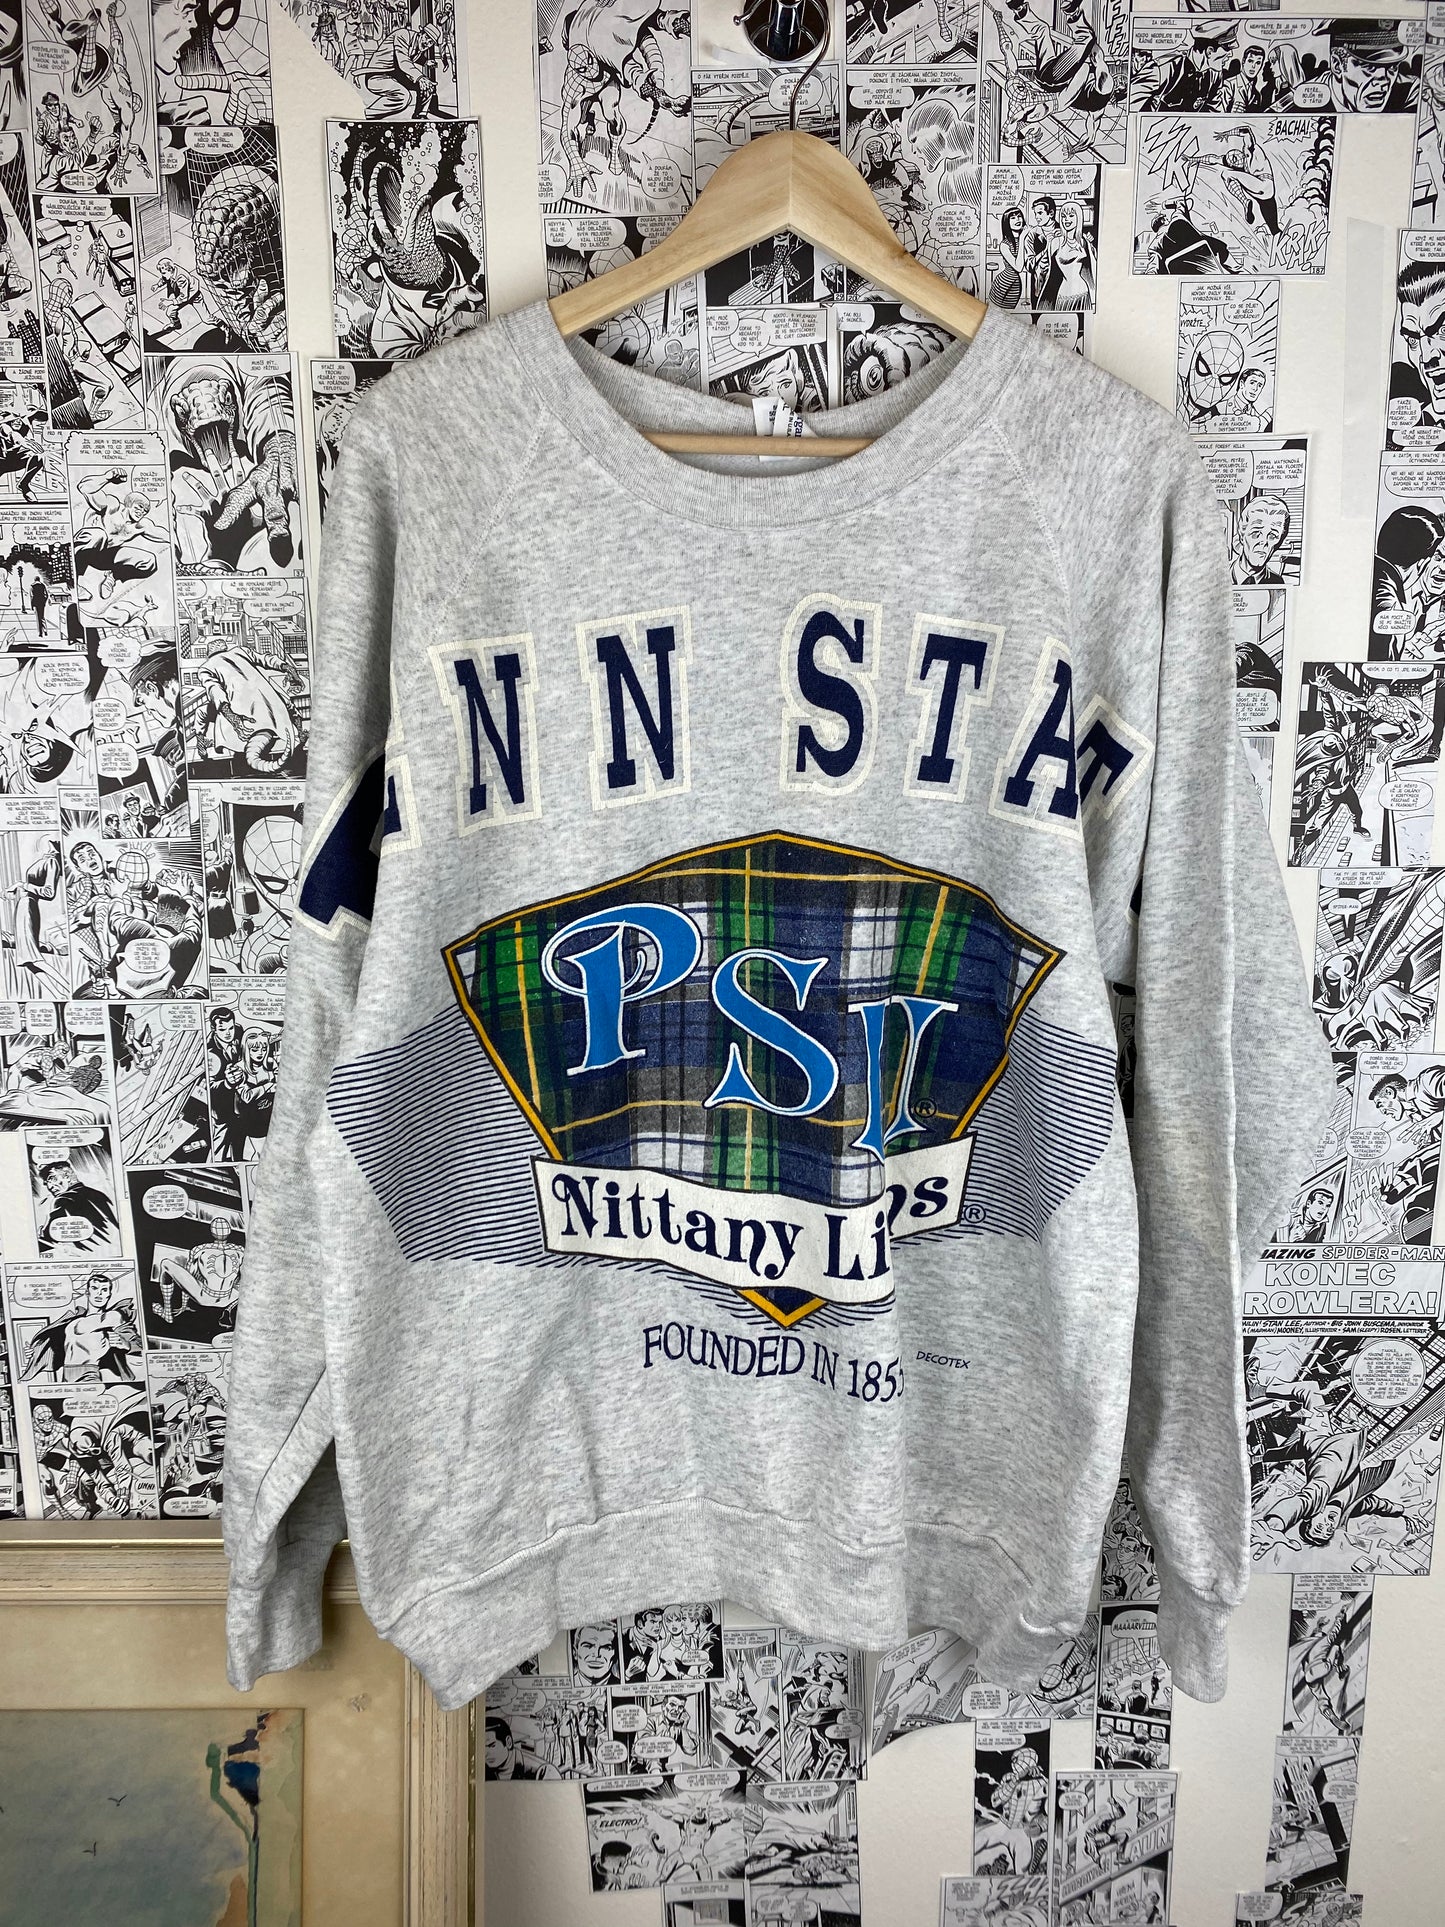 Vintage Pennstate - Nittany Lions 90s - size XL